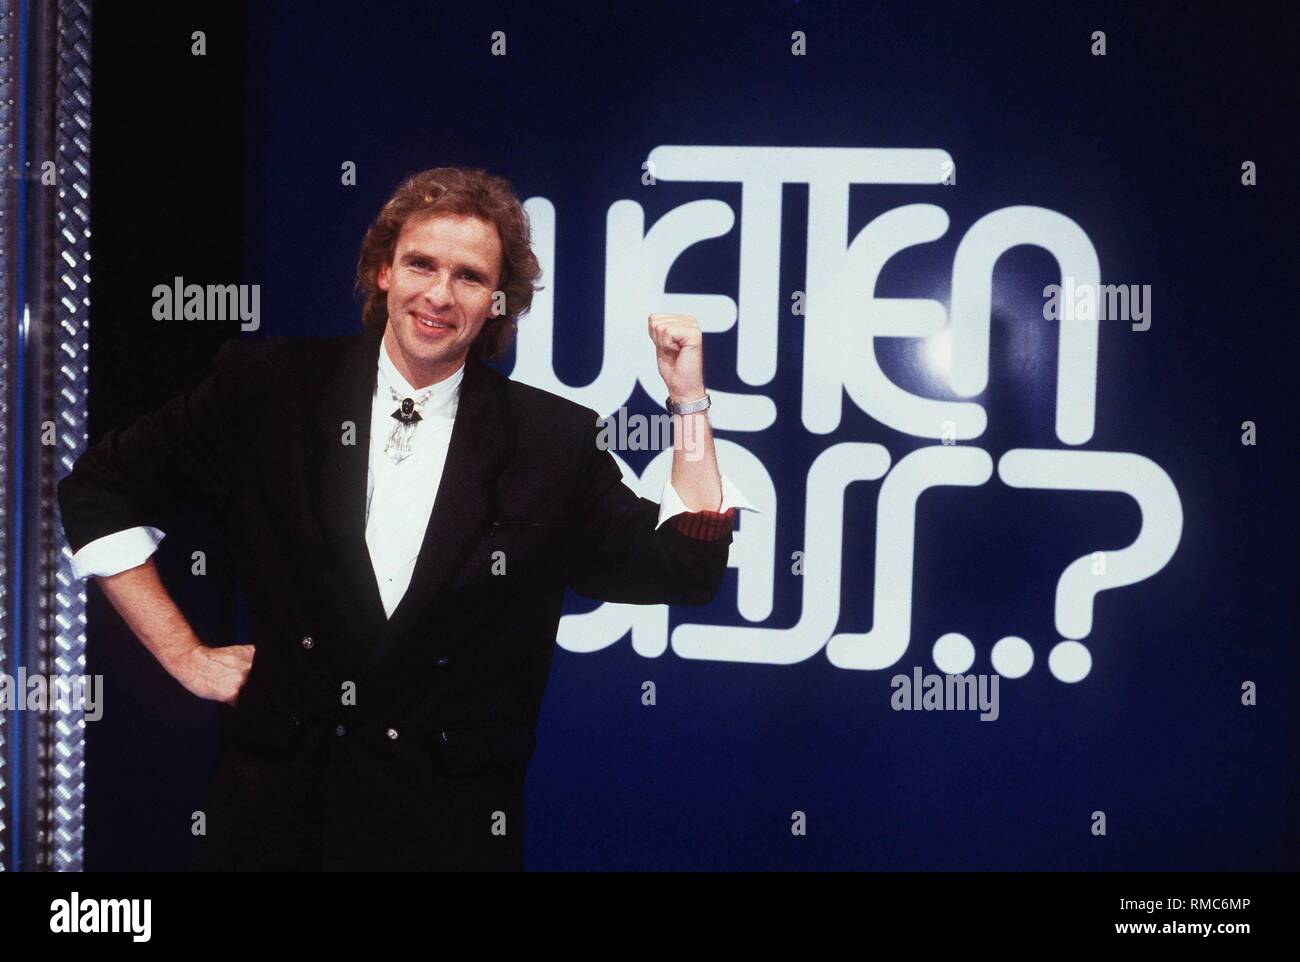 On December 25, 1952, the German television launched its triumphal march. 50 years of information and entertainment. Popular presenters and artists have become stars, moreover icons of electronic entertainment: Thomas Gottschalk, today's most successful show master of Germany. Here, Thomas Gottschalk in his Saturday night show 'Wetten, dass ..?' in 1987. Stock Photo